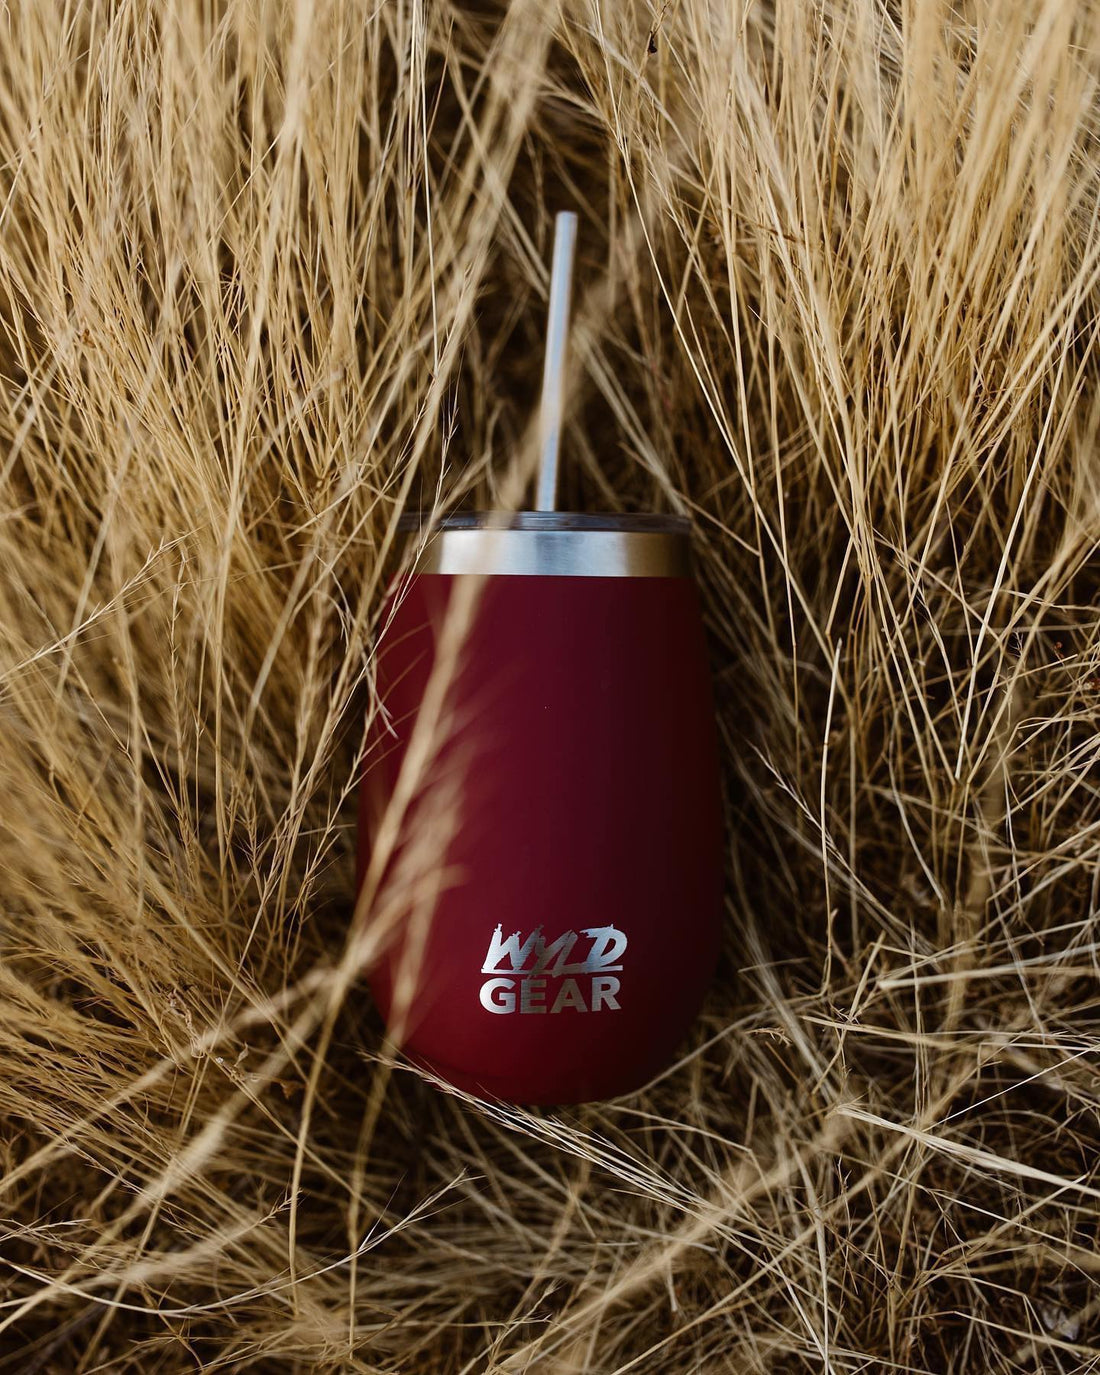 Red Wyld Gear wine tumbler sitting in tall grass